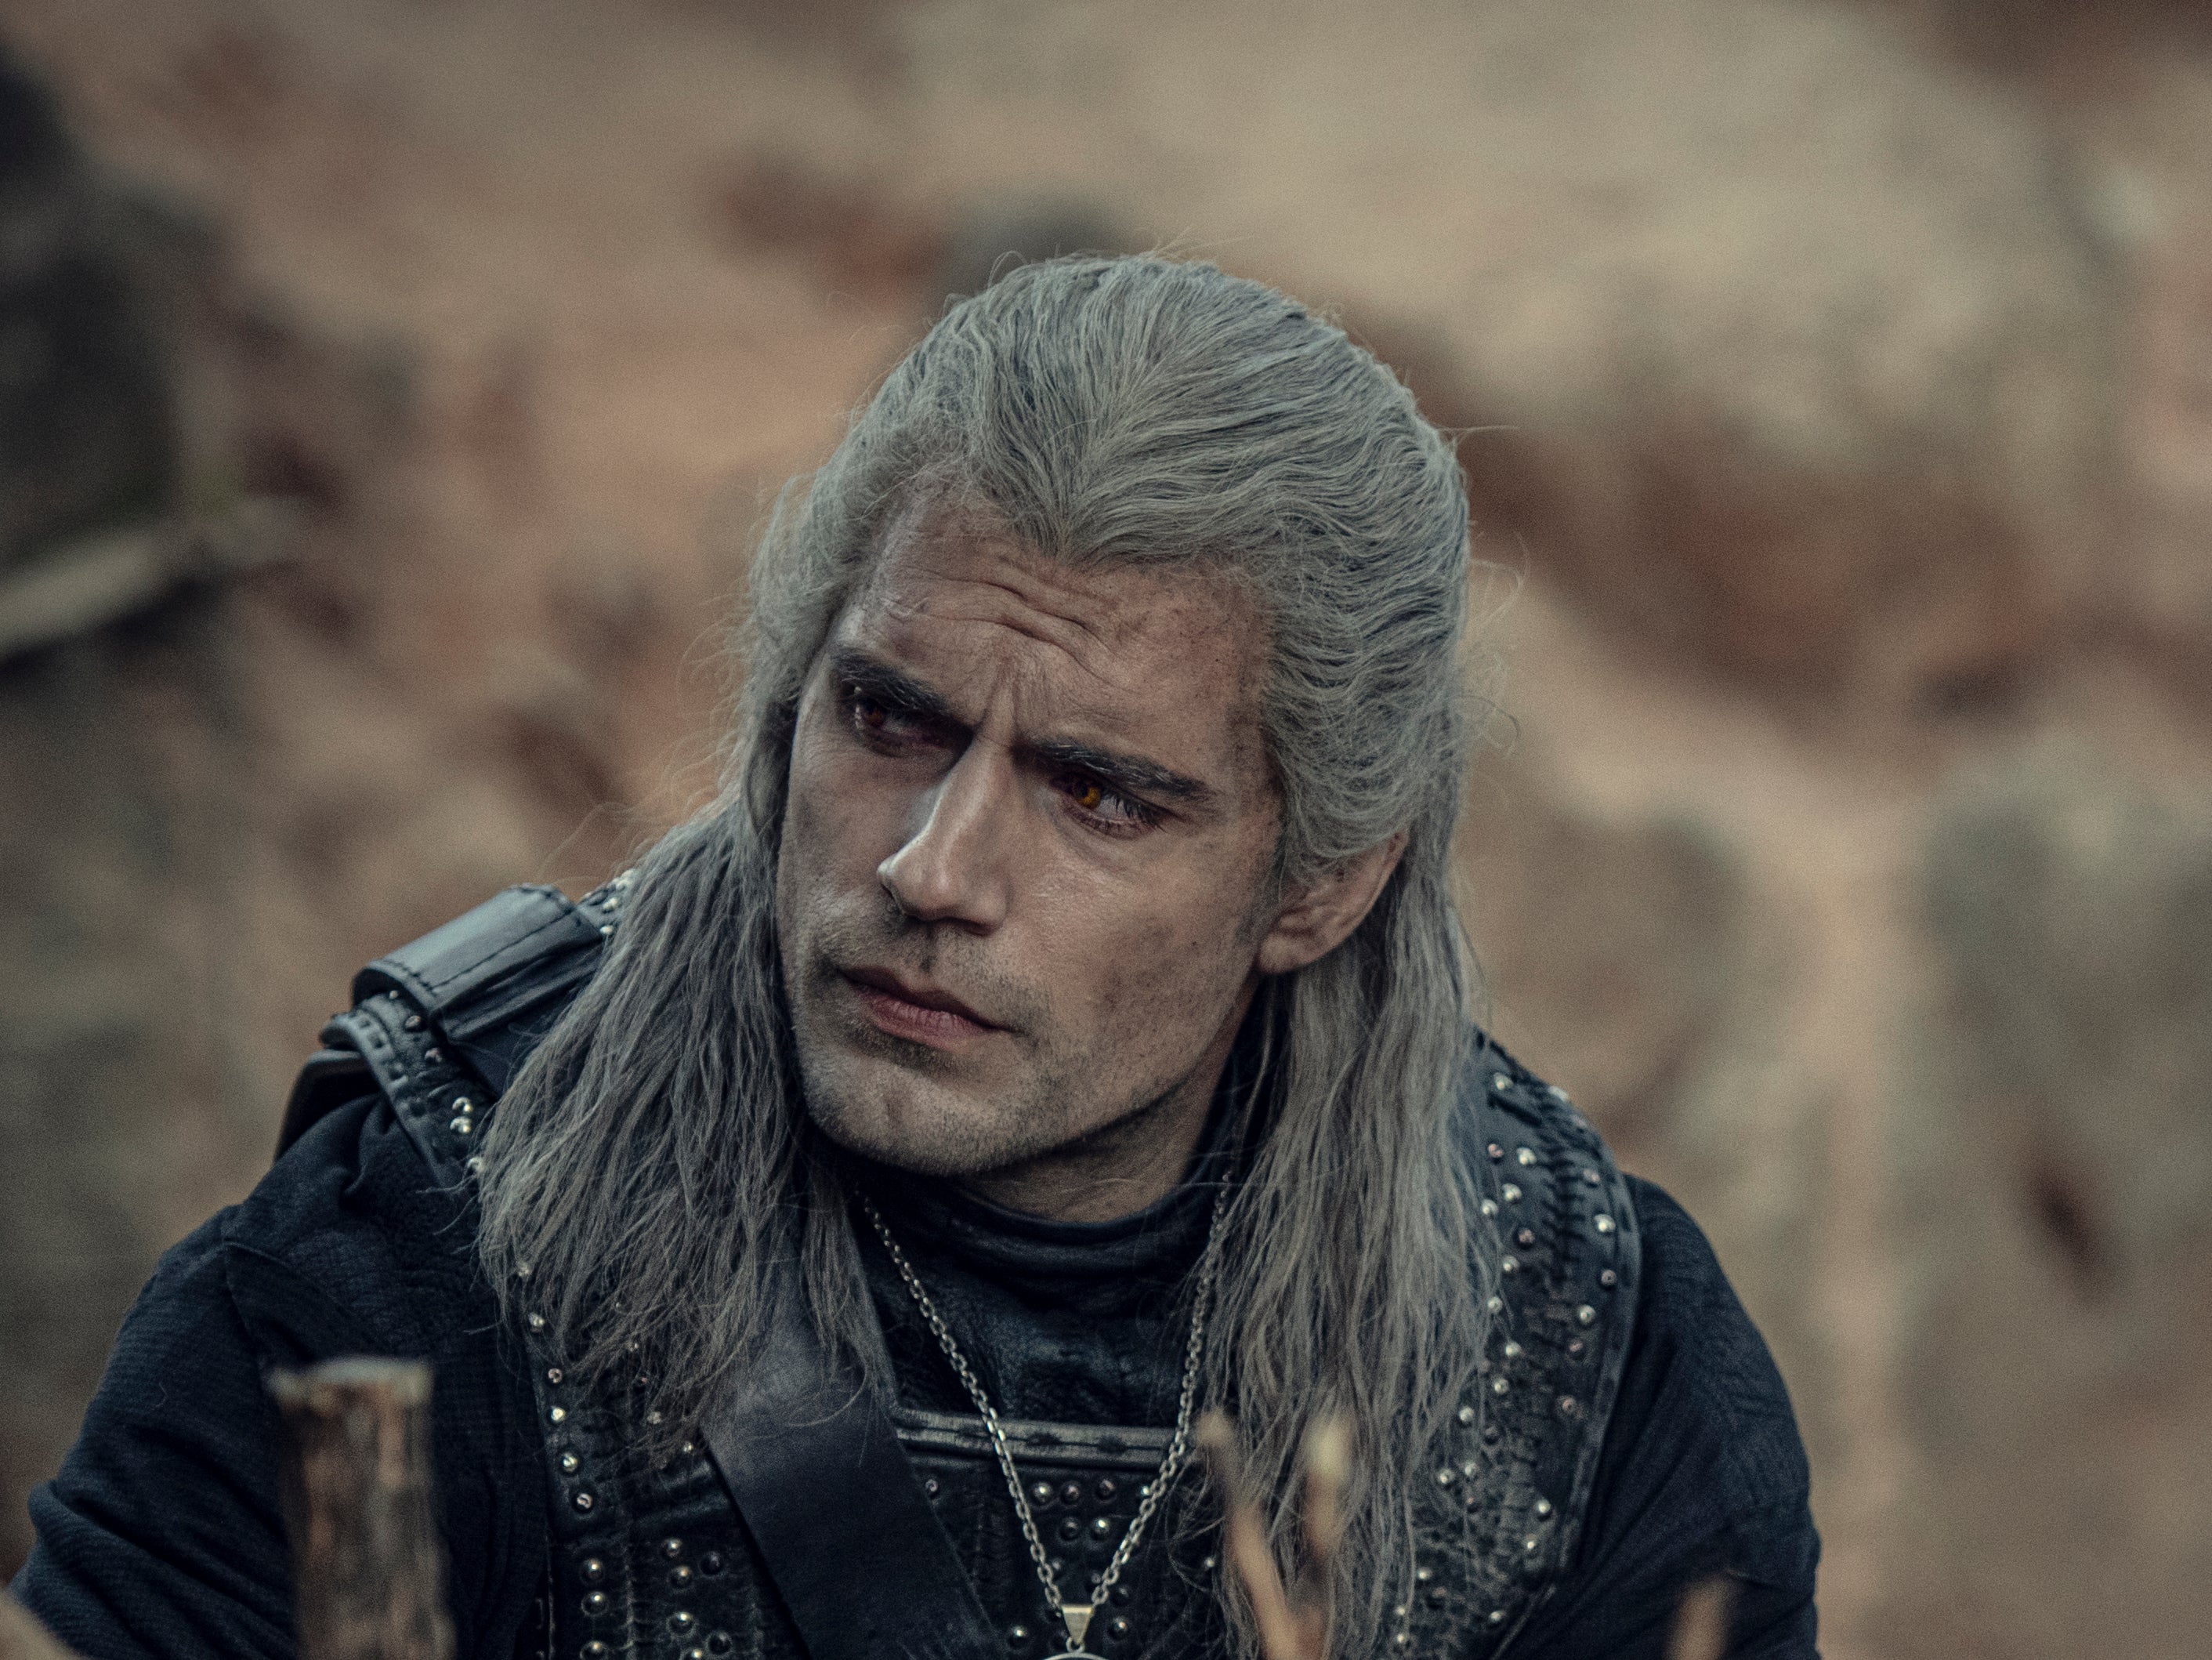 Henry Cavill leaving could be the best thing for The Witcher